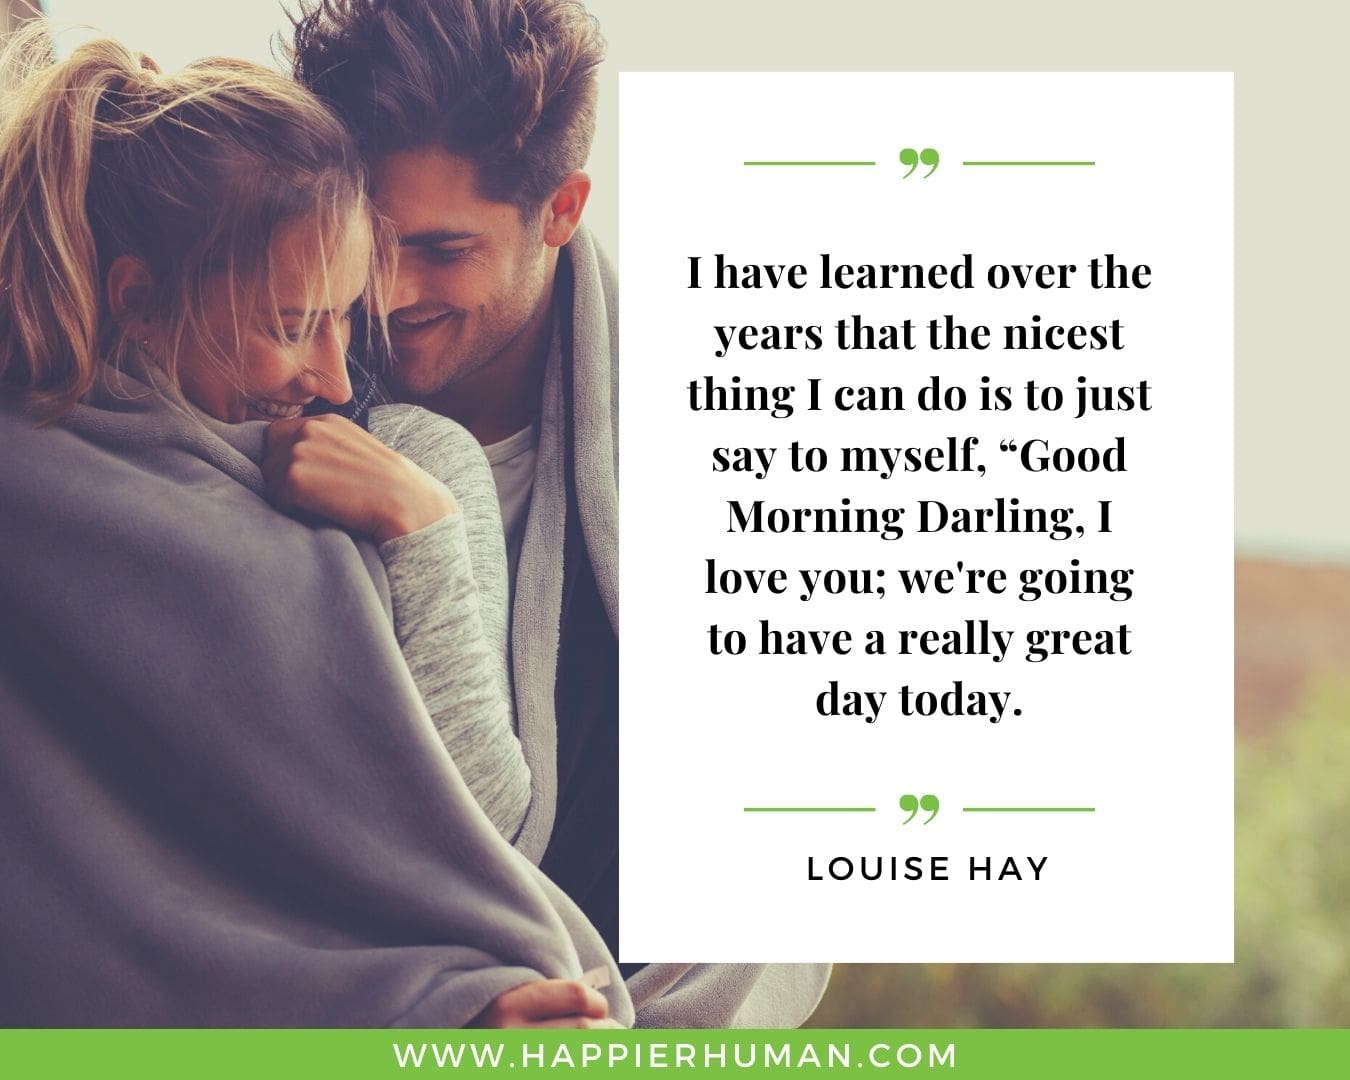 Great Day Quotes - “I have learned over the years that the nicest thing I can do is to just say to myself, "Good Morning Darling, I love you; we're going to have a really great day today.” – Louise Hay